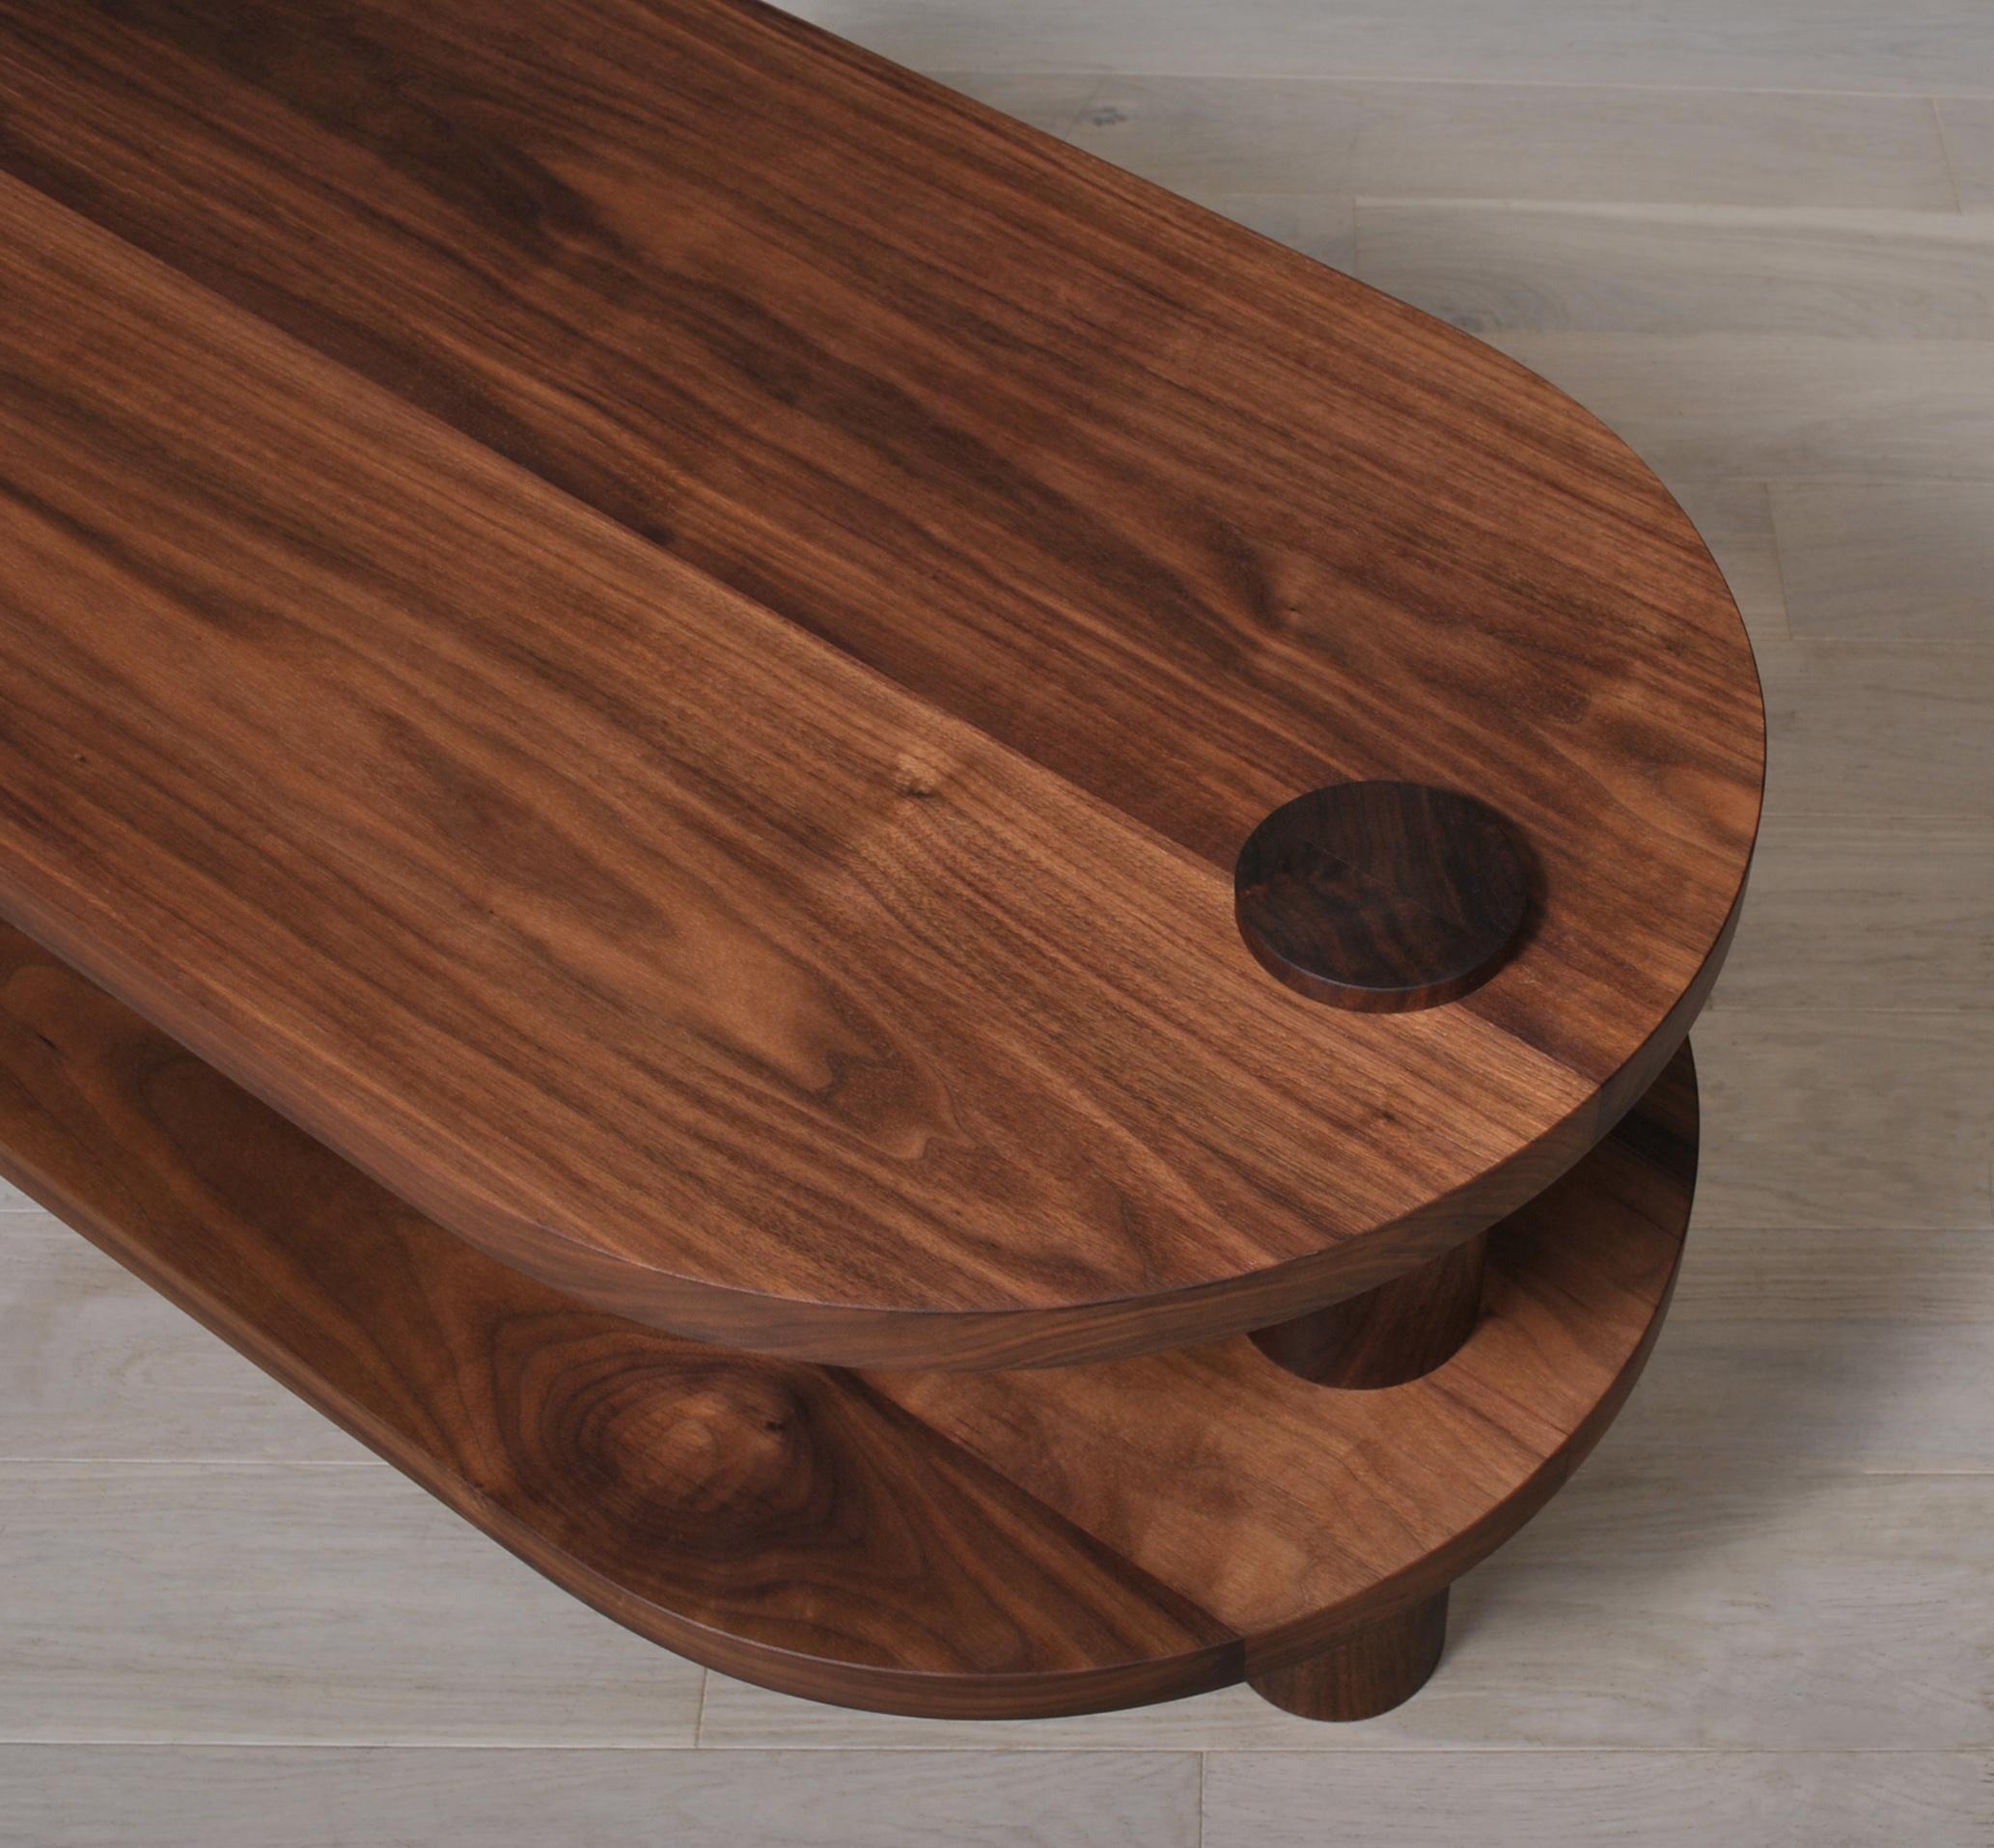 Hand-Crafted Architectural Handcrafted Walnut Coffee Table